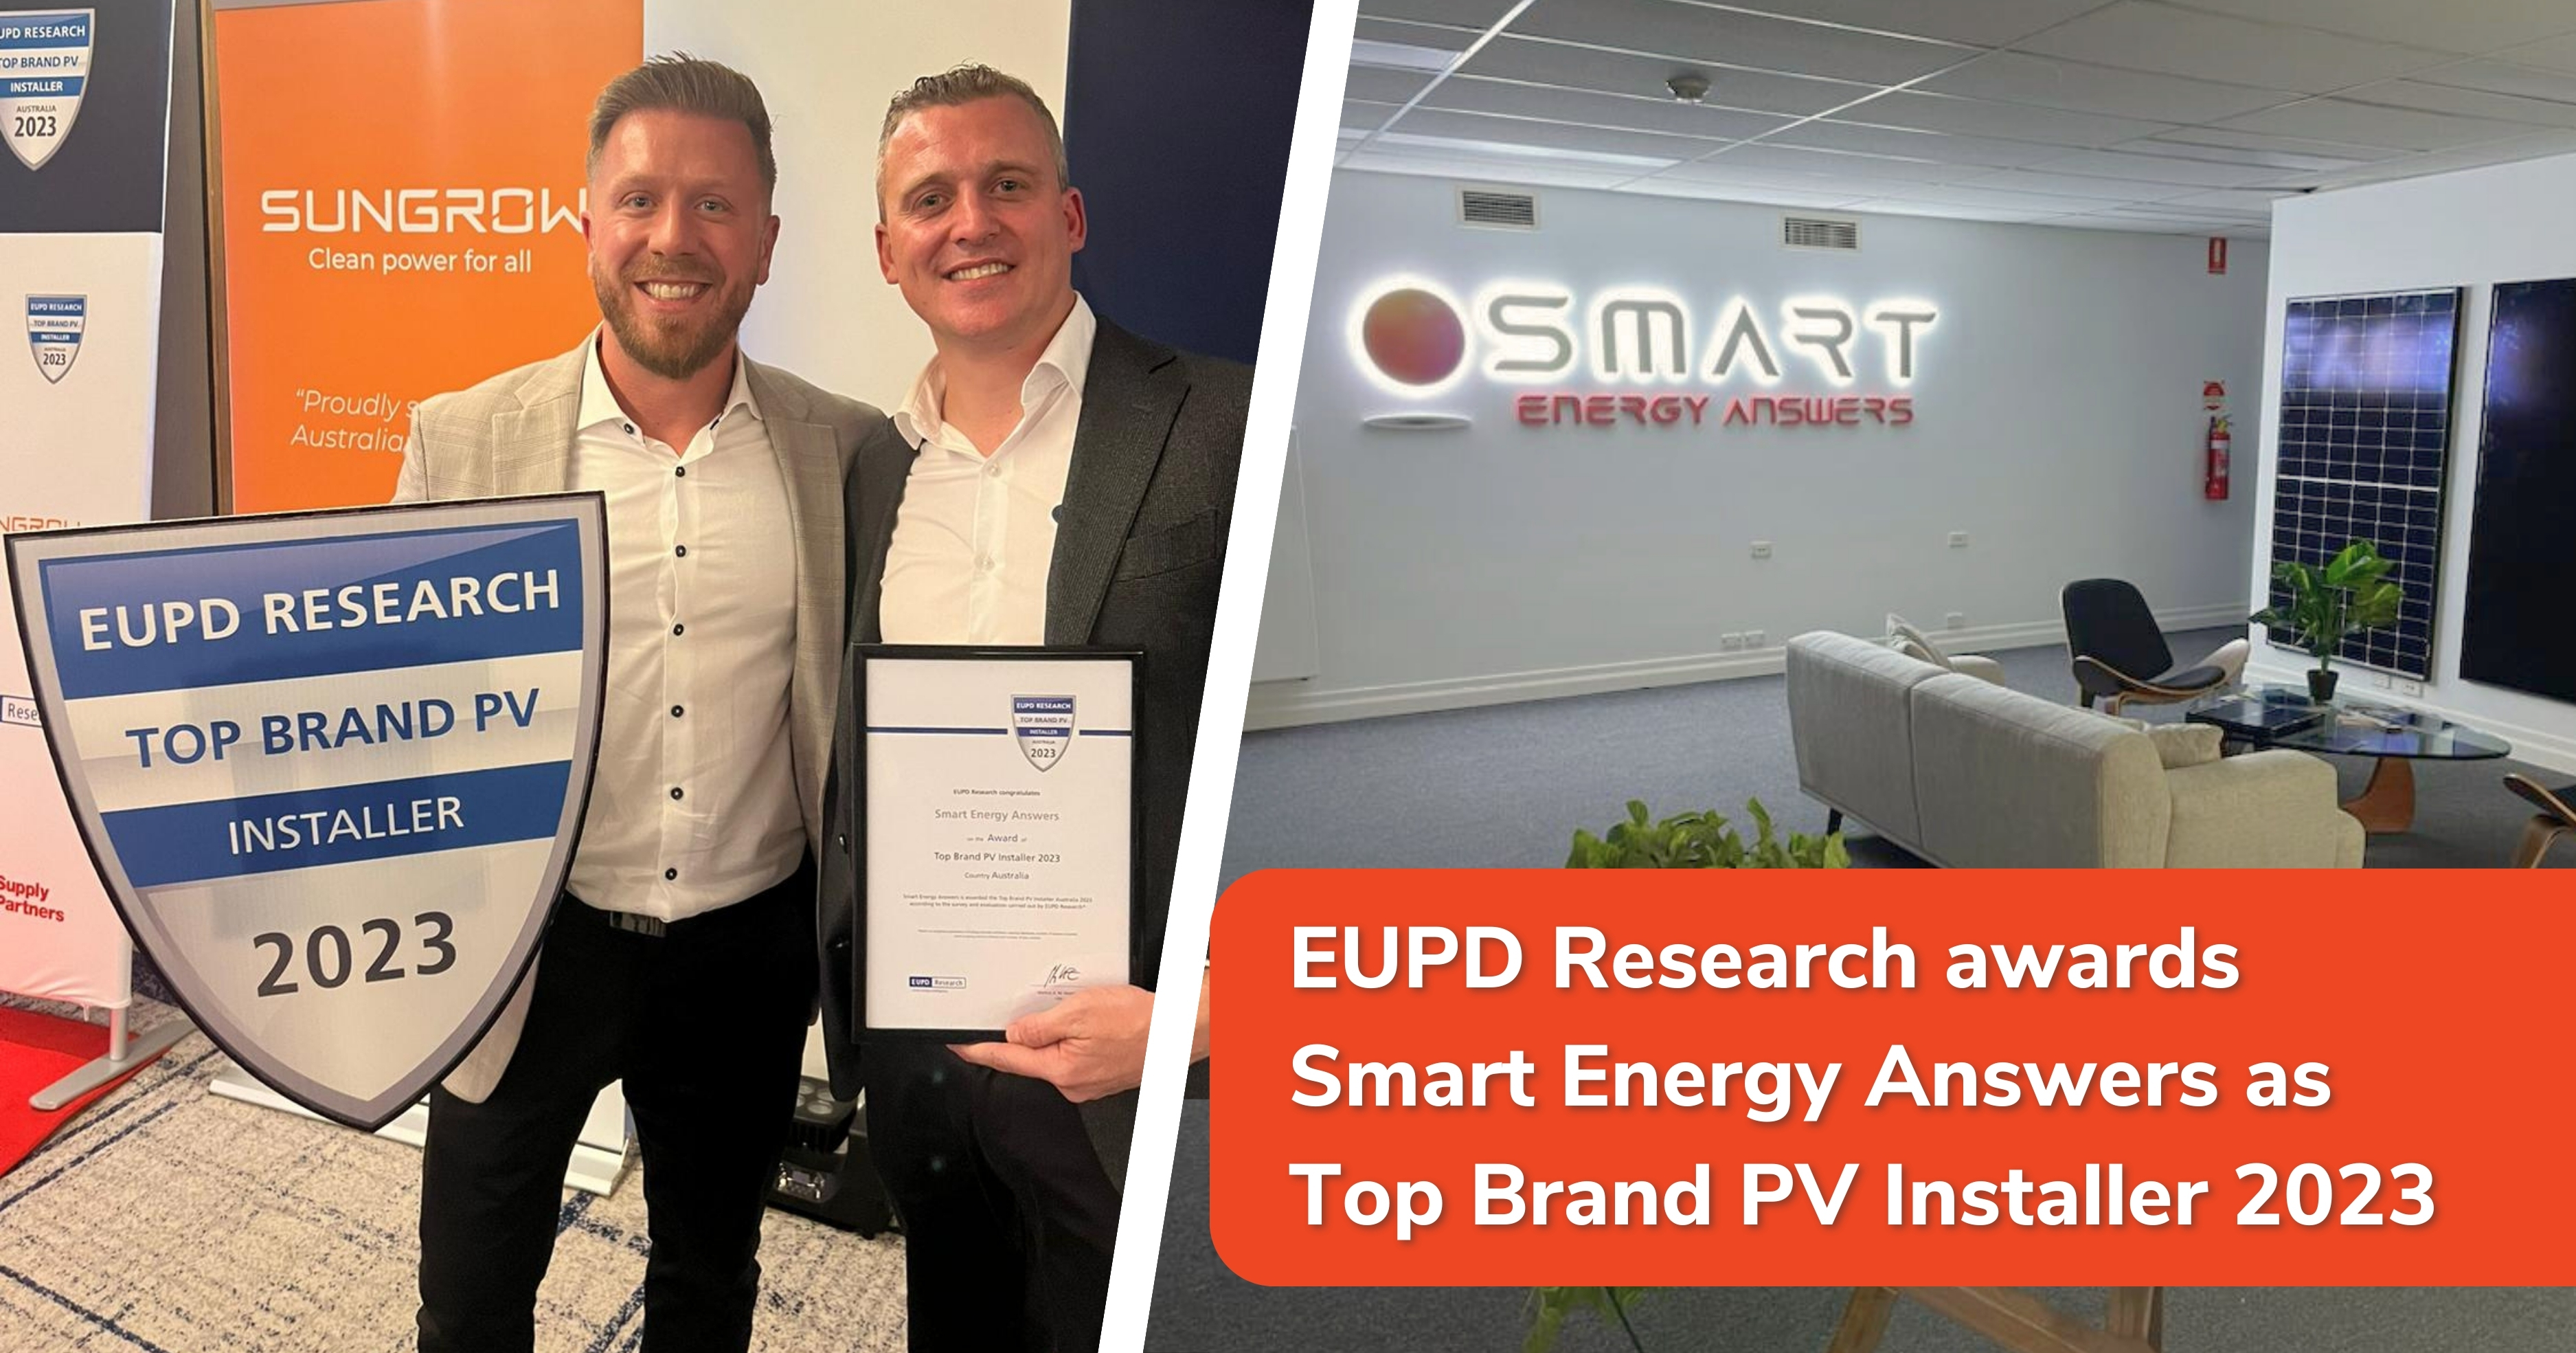 Smart Energy Answers: Top Brand PV Installer 2023 Award, EUPD Research - featured image